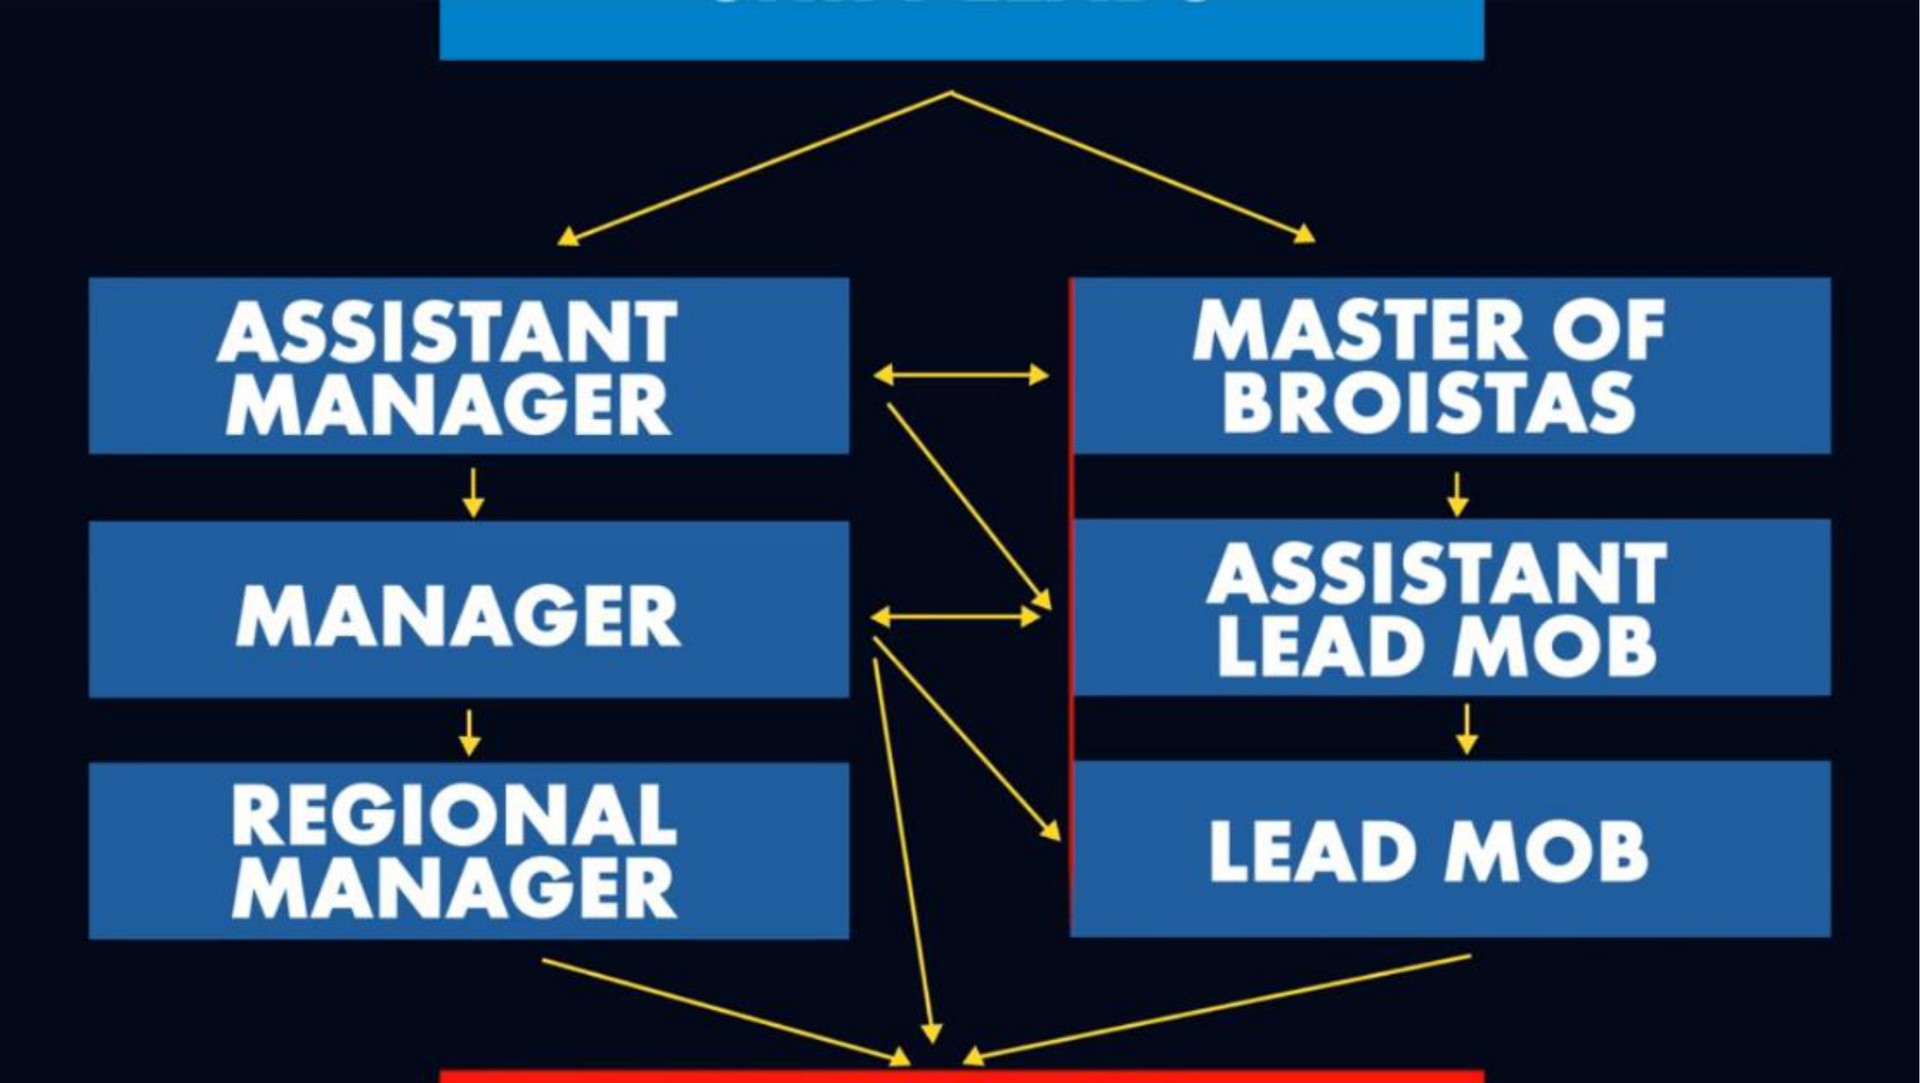 assistant manager manager regional master of lead mob | Dutch Bros